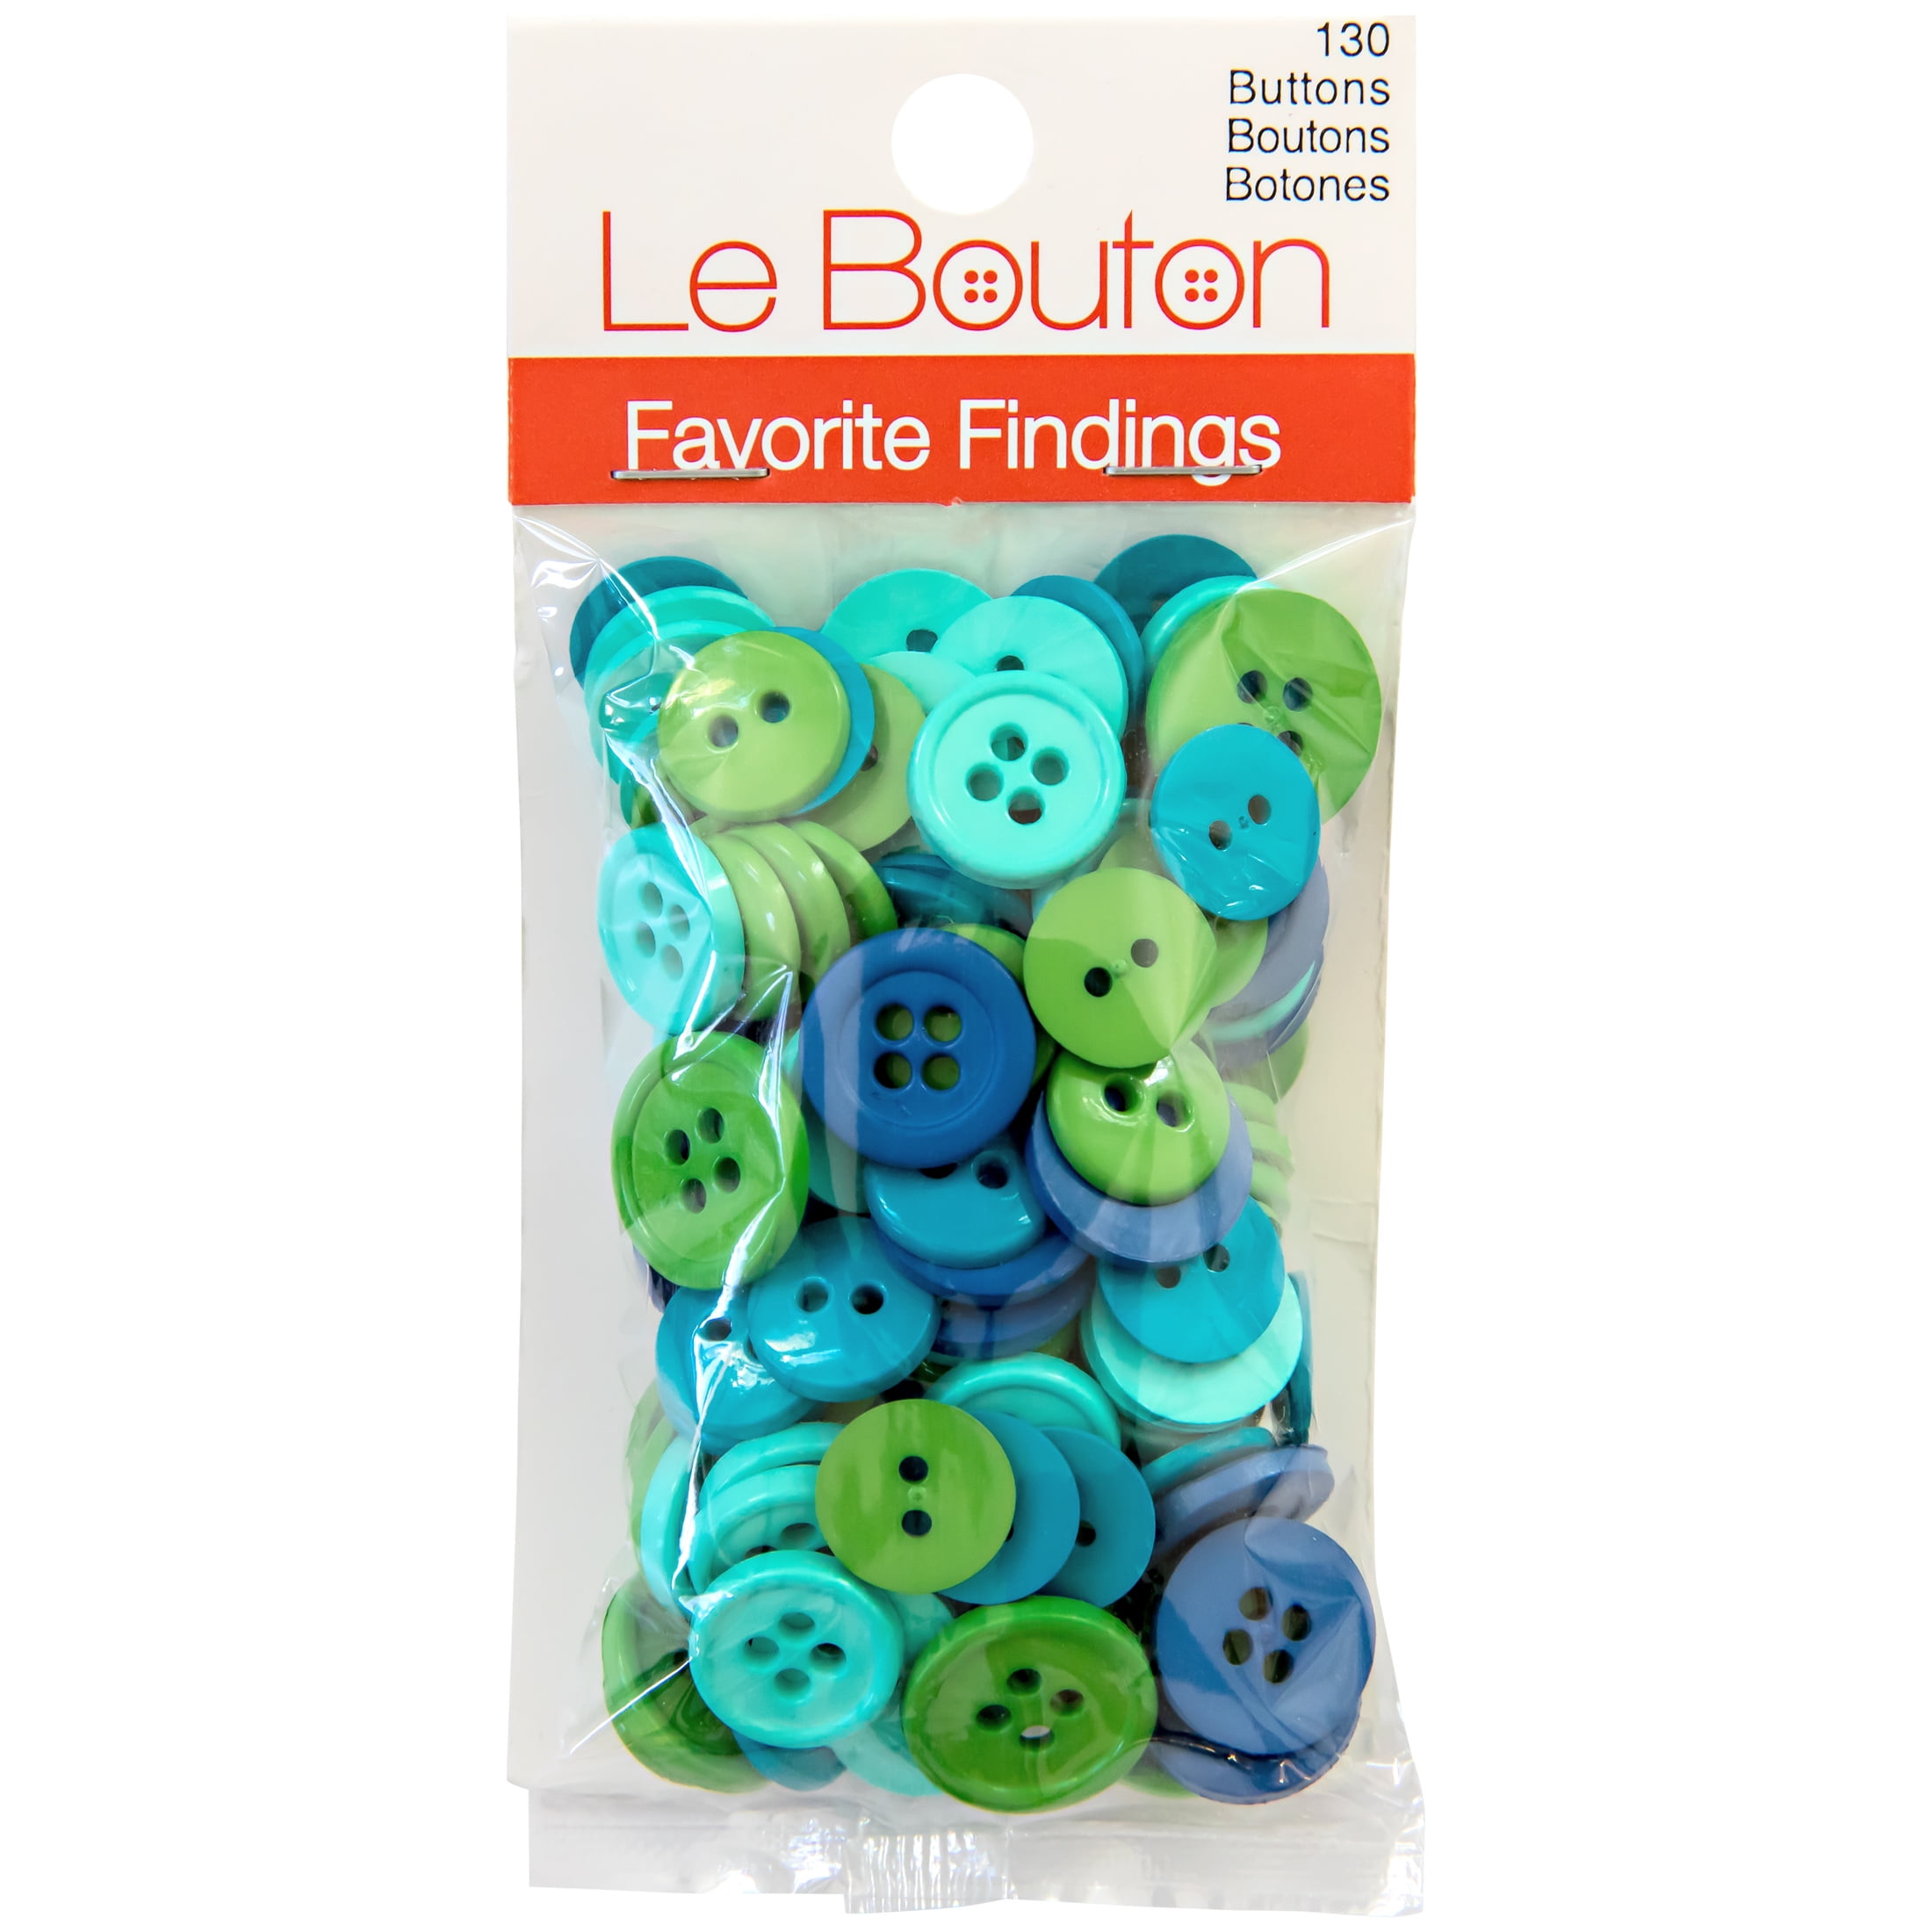 FAVORITE FINDINGS BIG BUTTONS 6 PER PACKAGE Several to Choose from